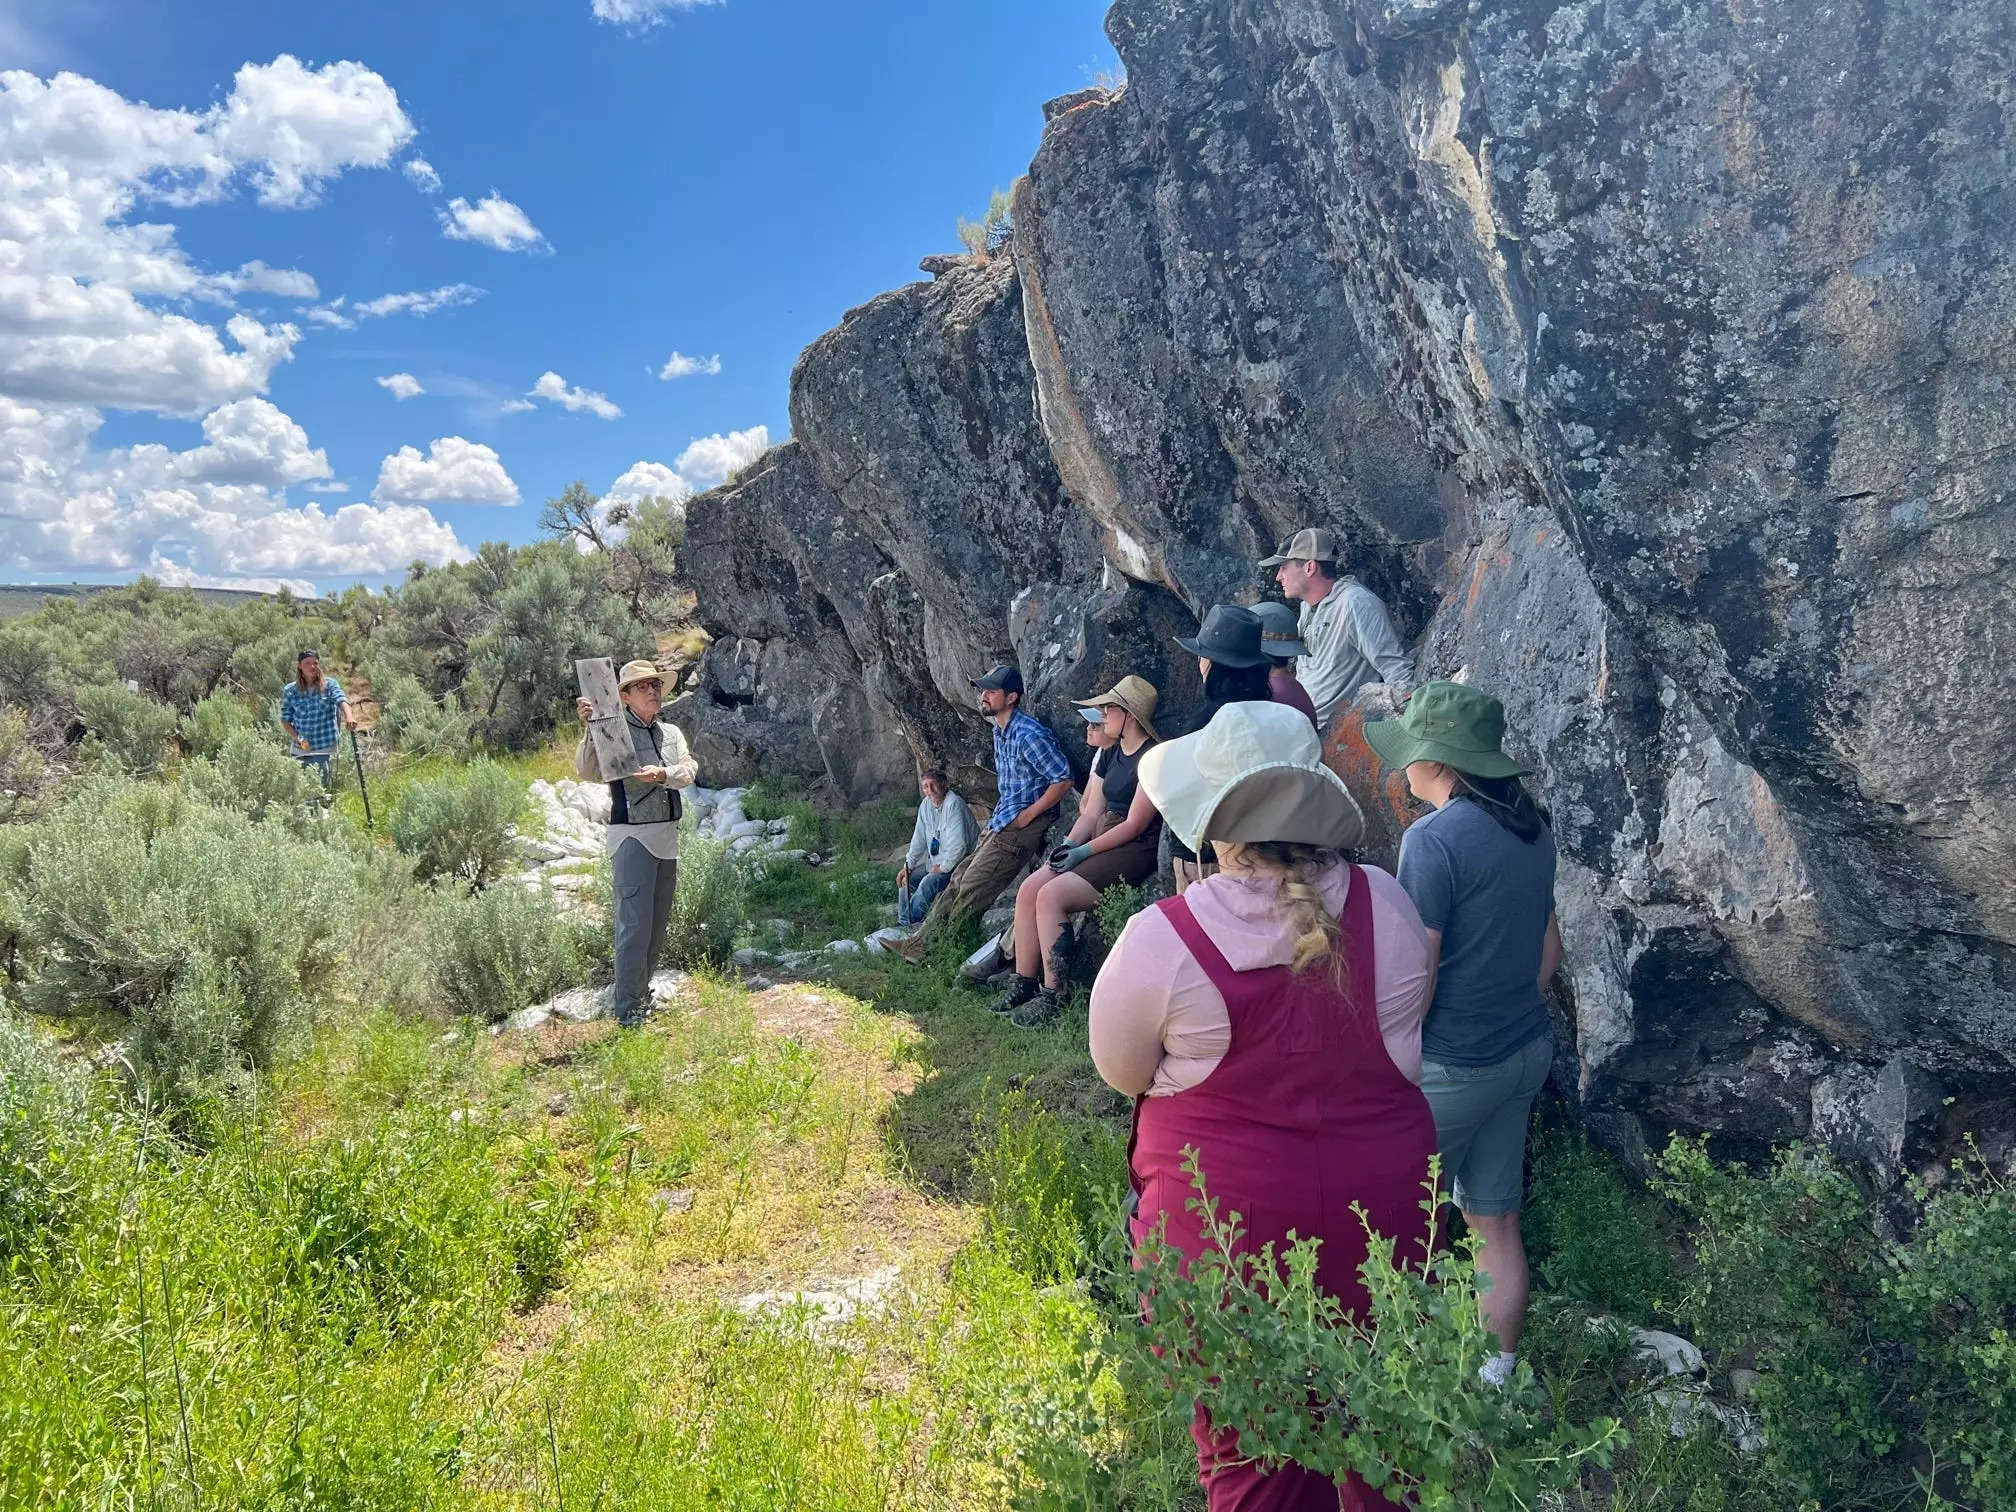 Several people stand near the Rimrock Draw Rockshelter, an archeological site containg stone tools that are over 18,000 years old